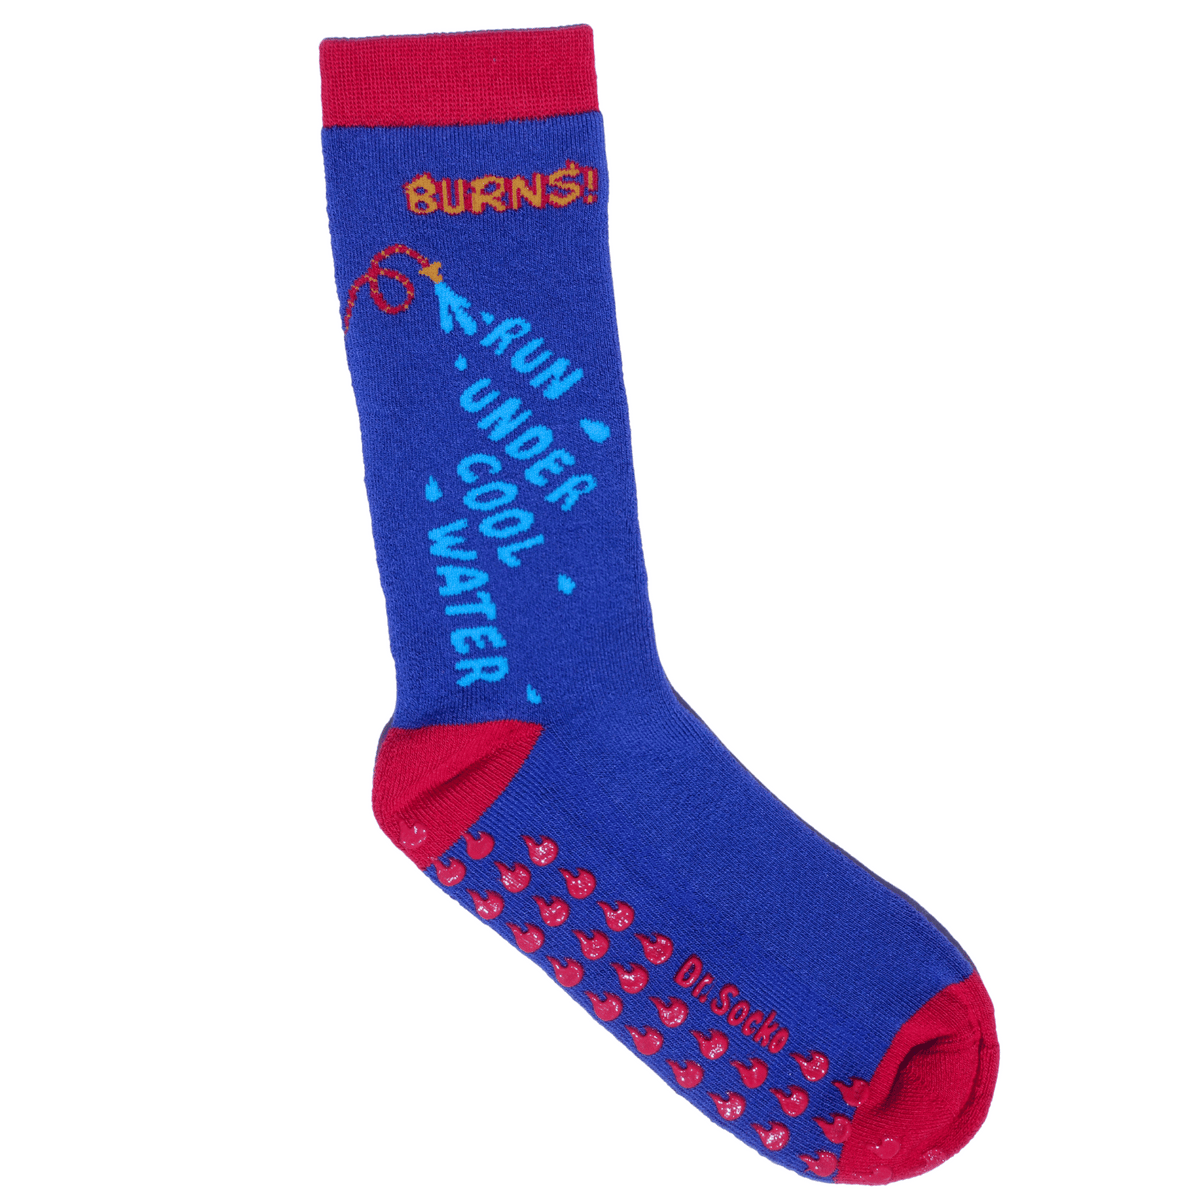 Best Grip Socks, for Men and Women: MiamiCurated